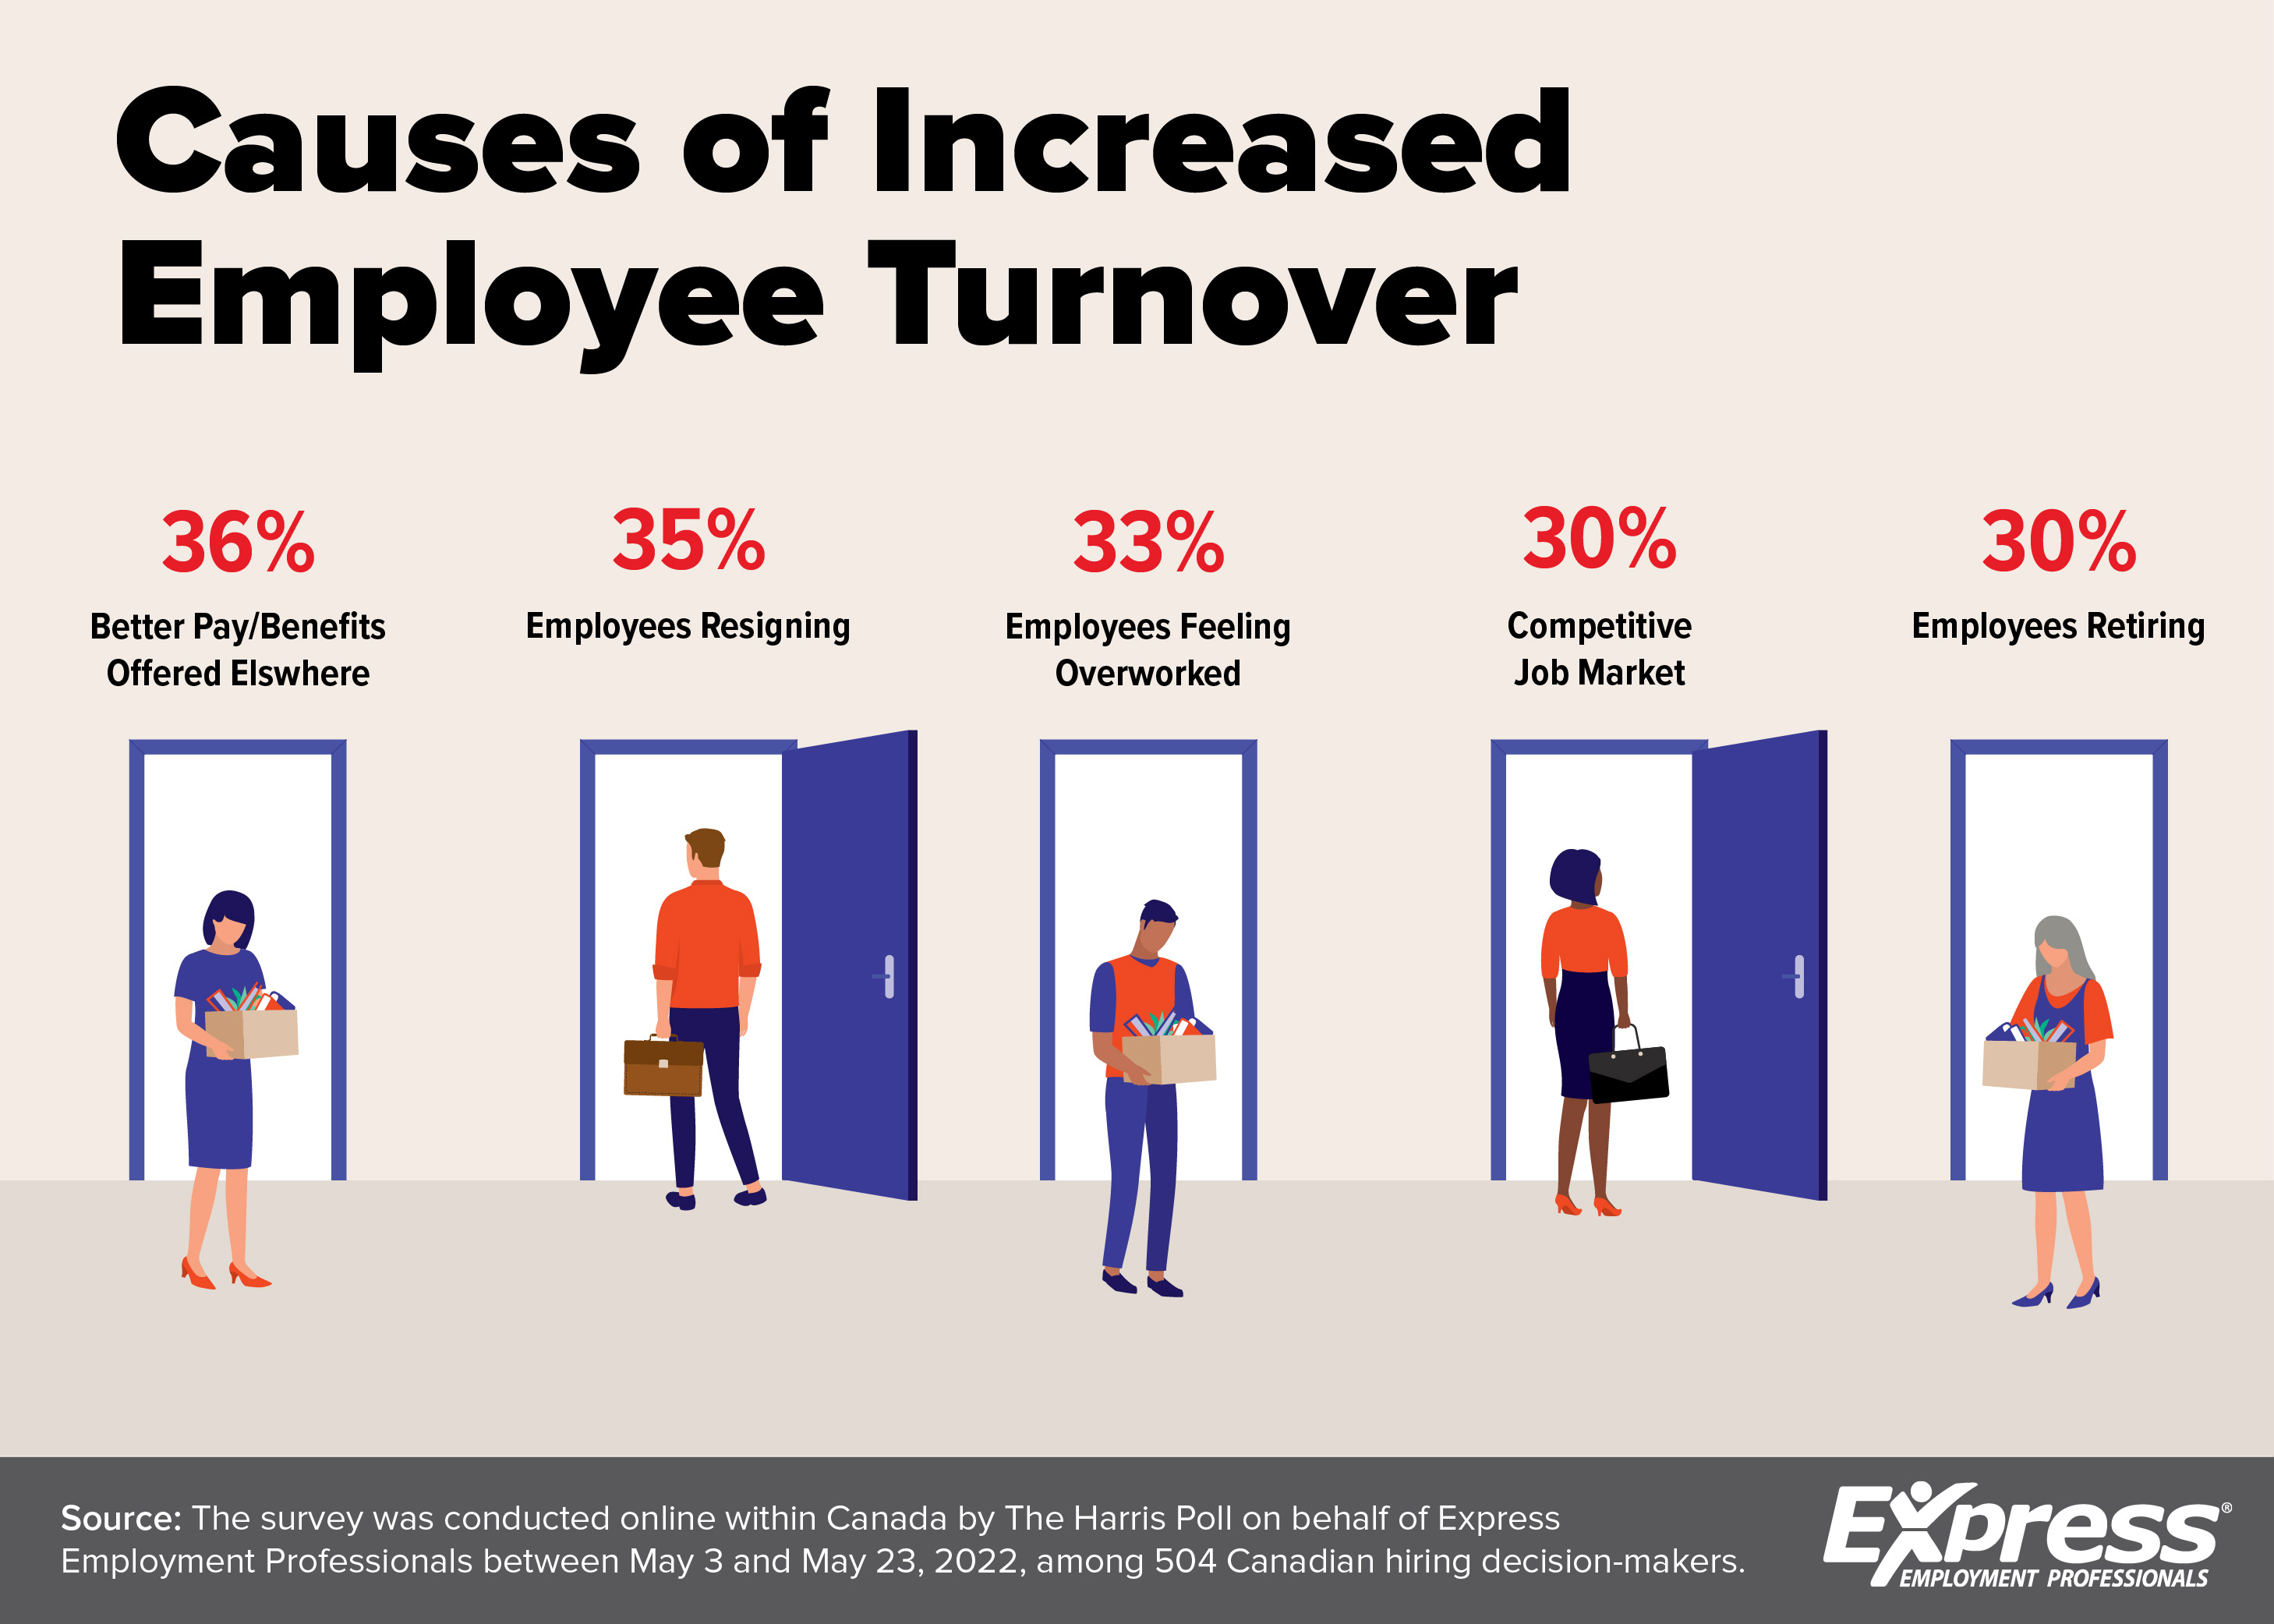 Turnover Placing Heavy Burden on Remaining Workers